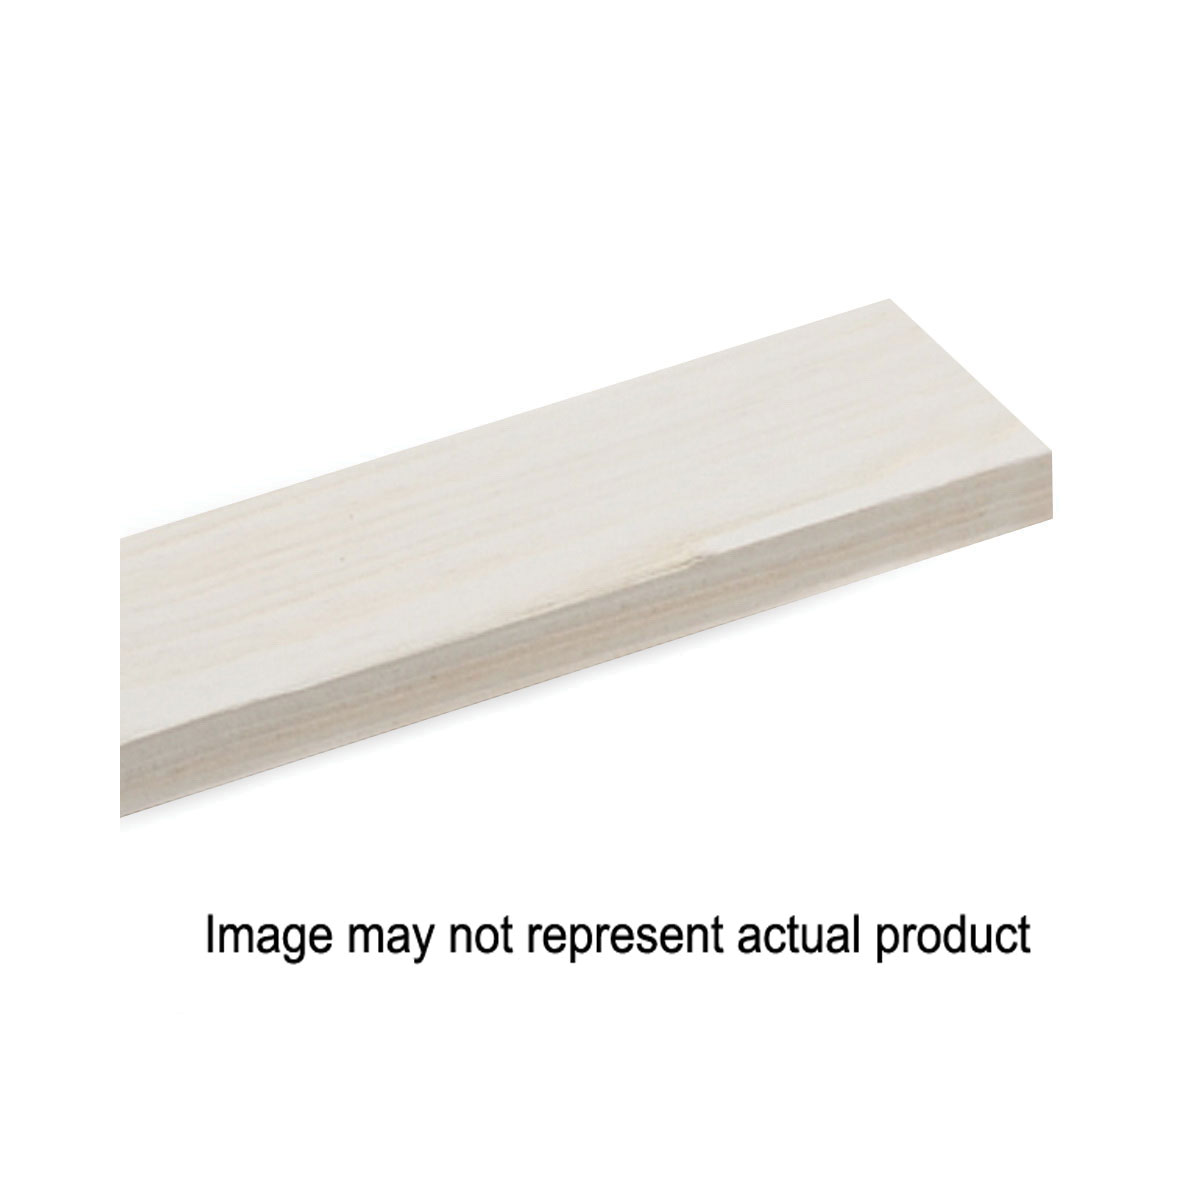 Landscape Series TWLABRD Wall Plank, 19-11/16 in L, 2-3/4 in W, 9.8 sq-ft Coverage Area, Pine Wood